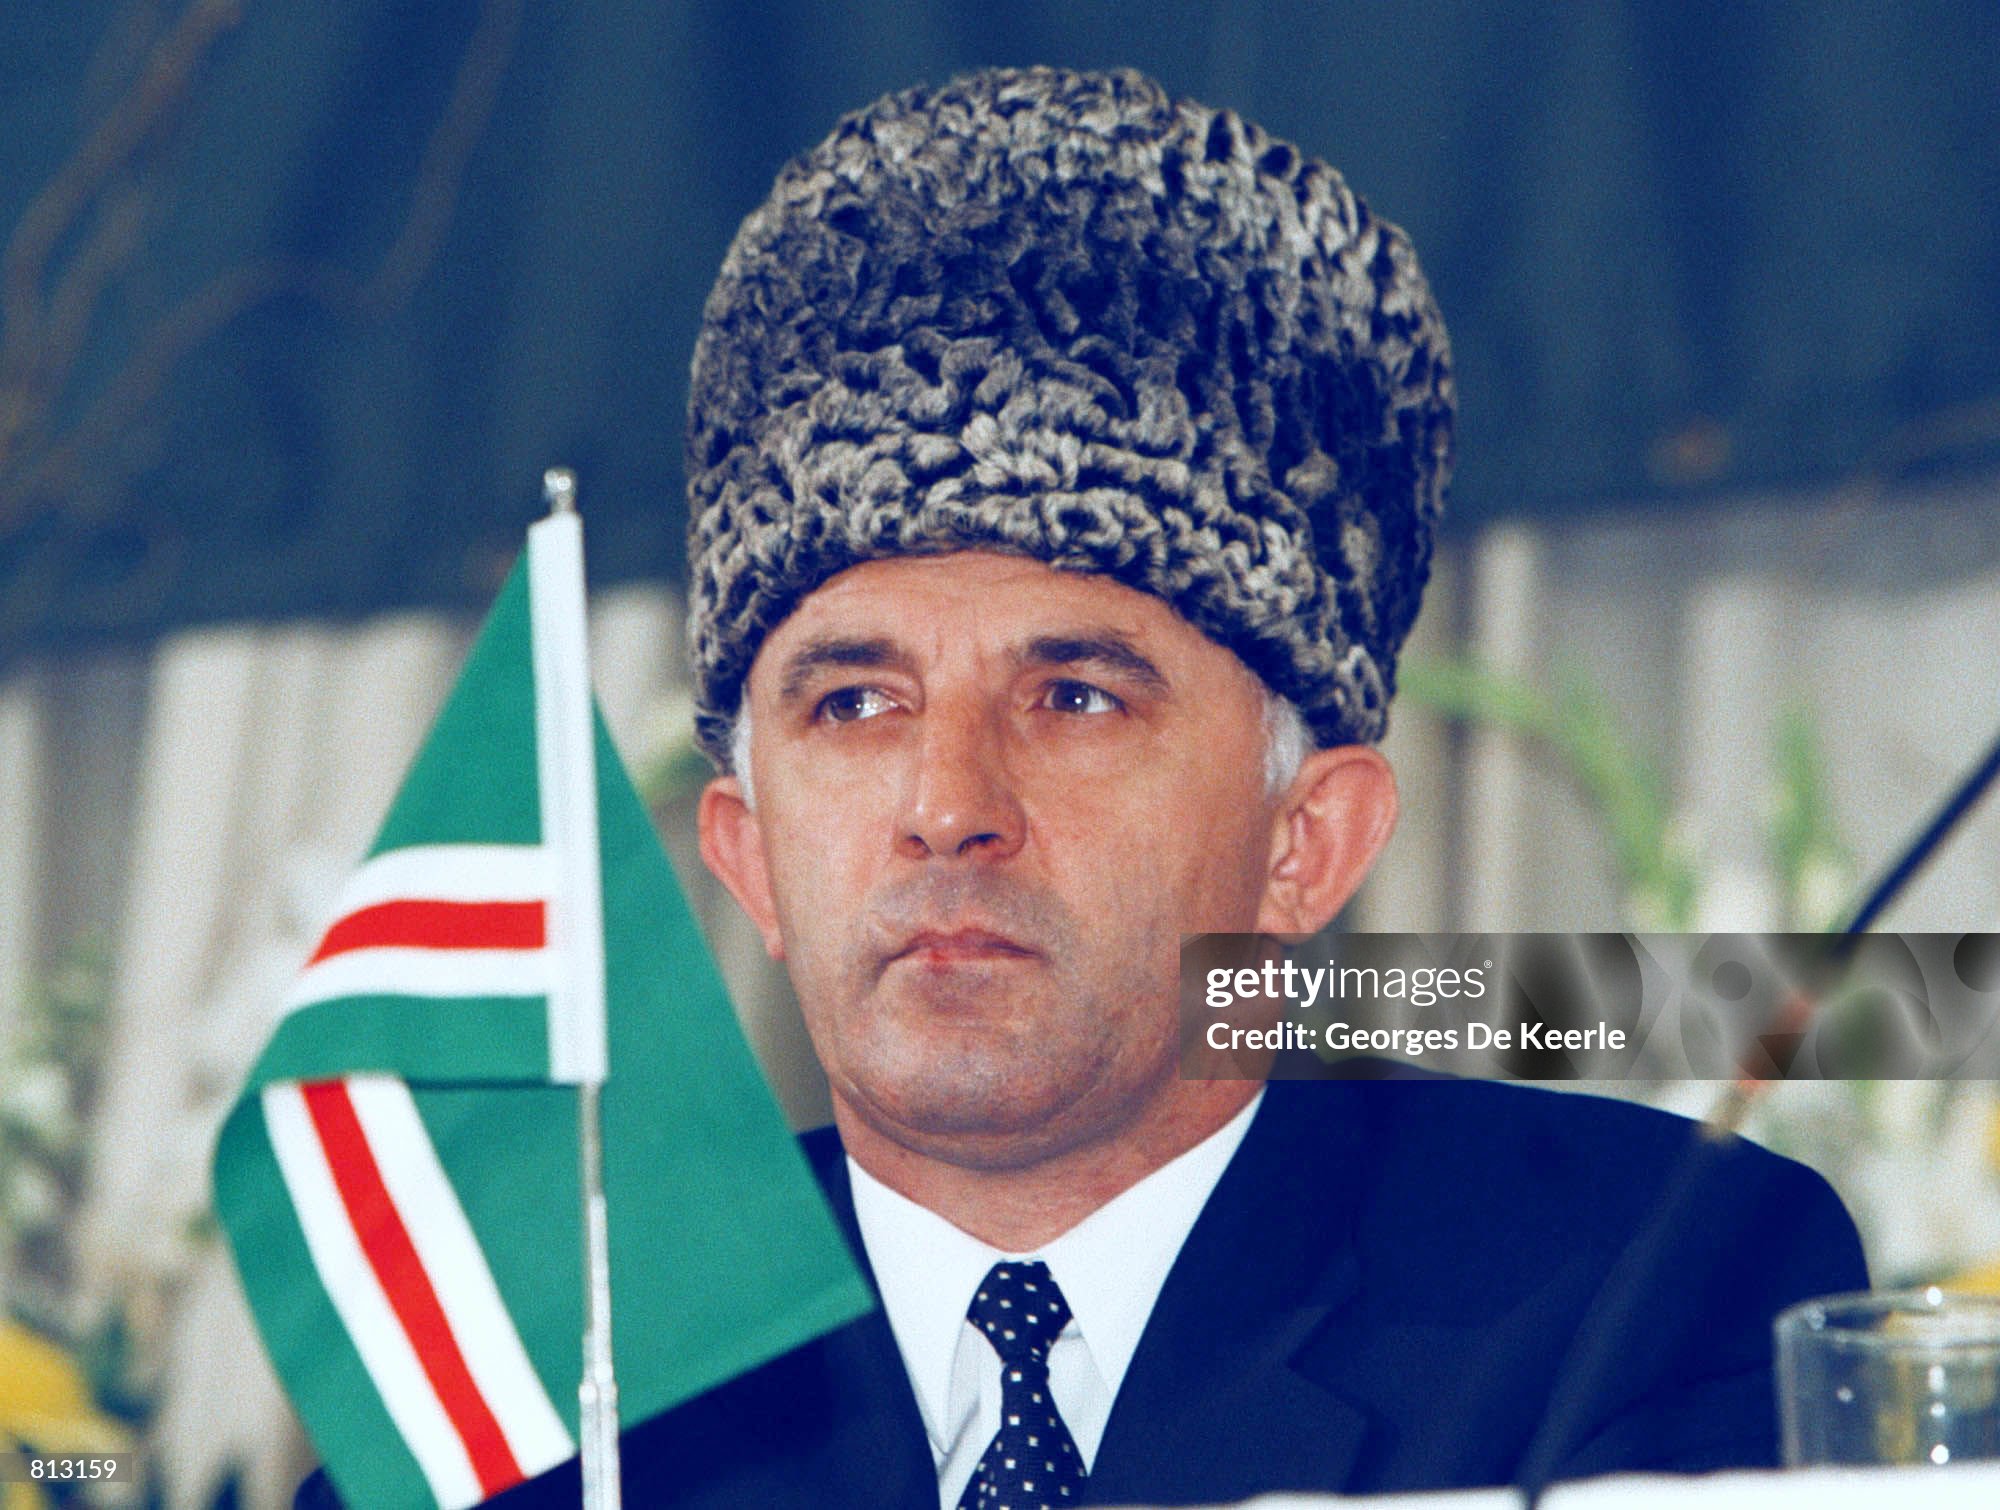 the-president-of-russias-separatist-province-of-chechnya-aslan-maskhadov-during-a-press.jpg